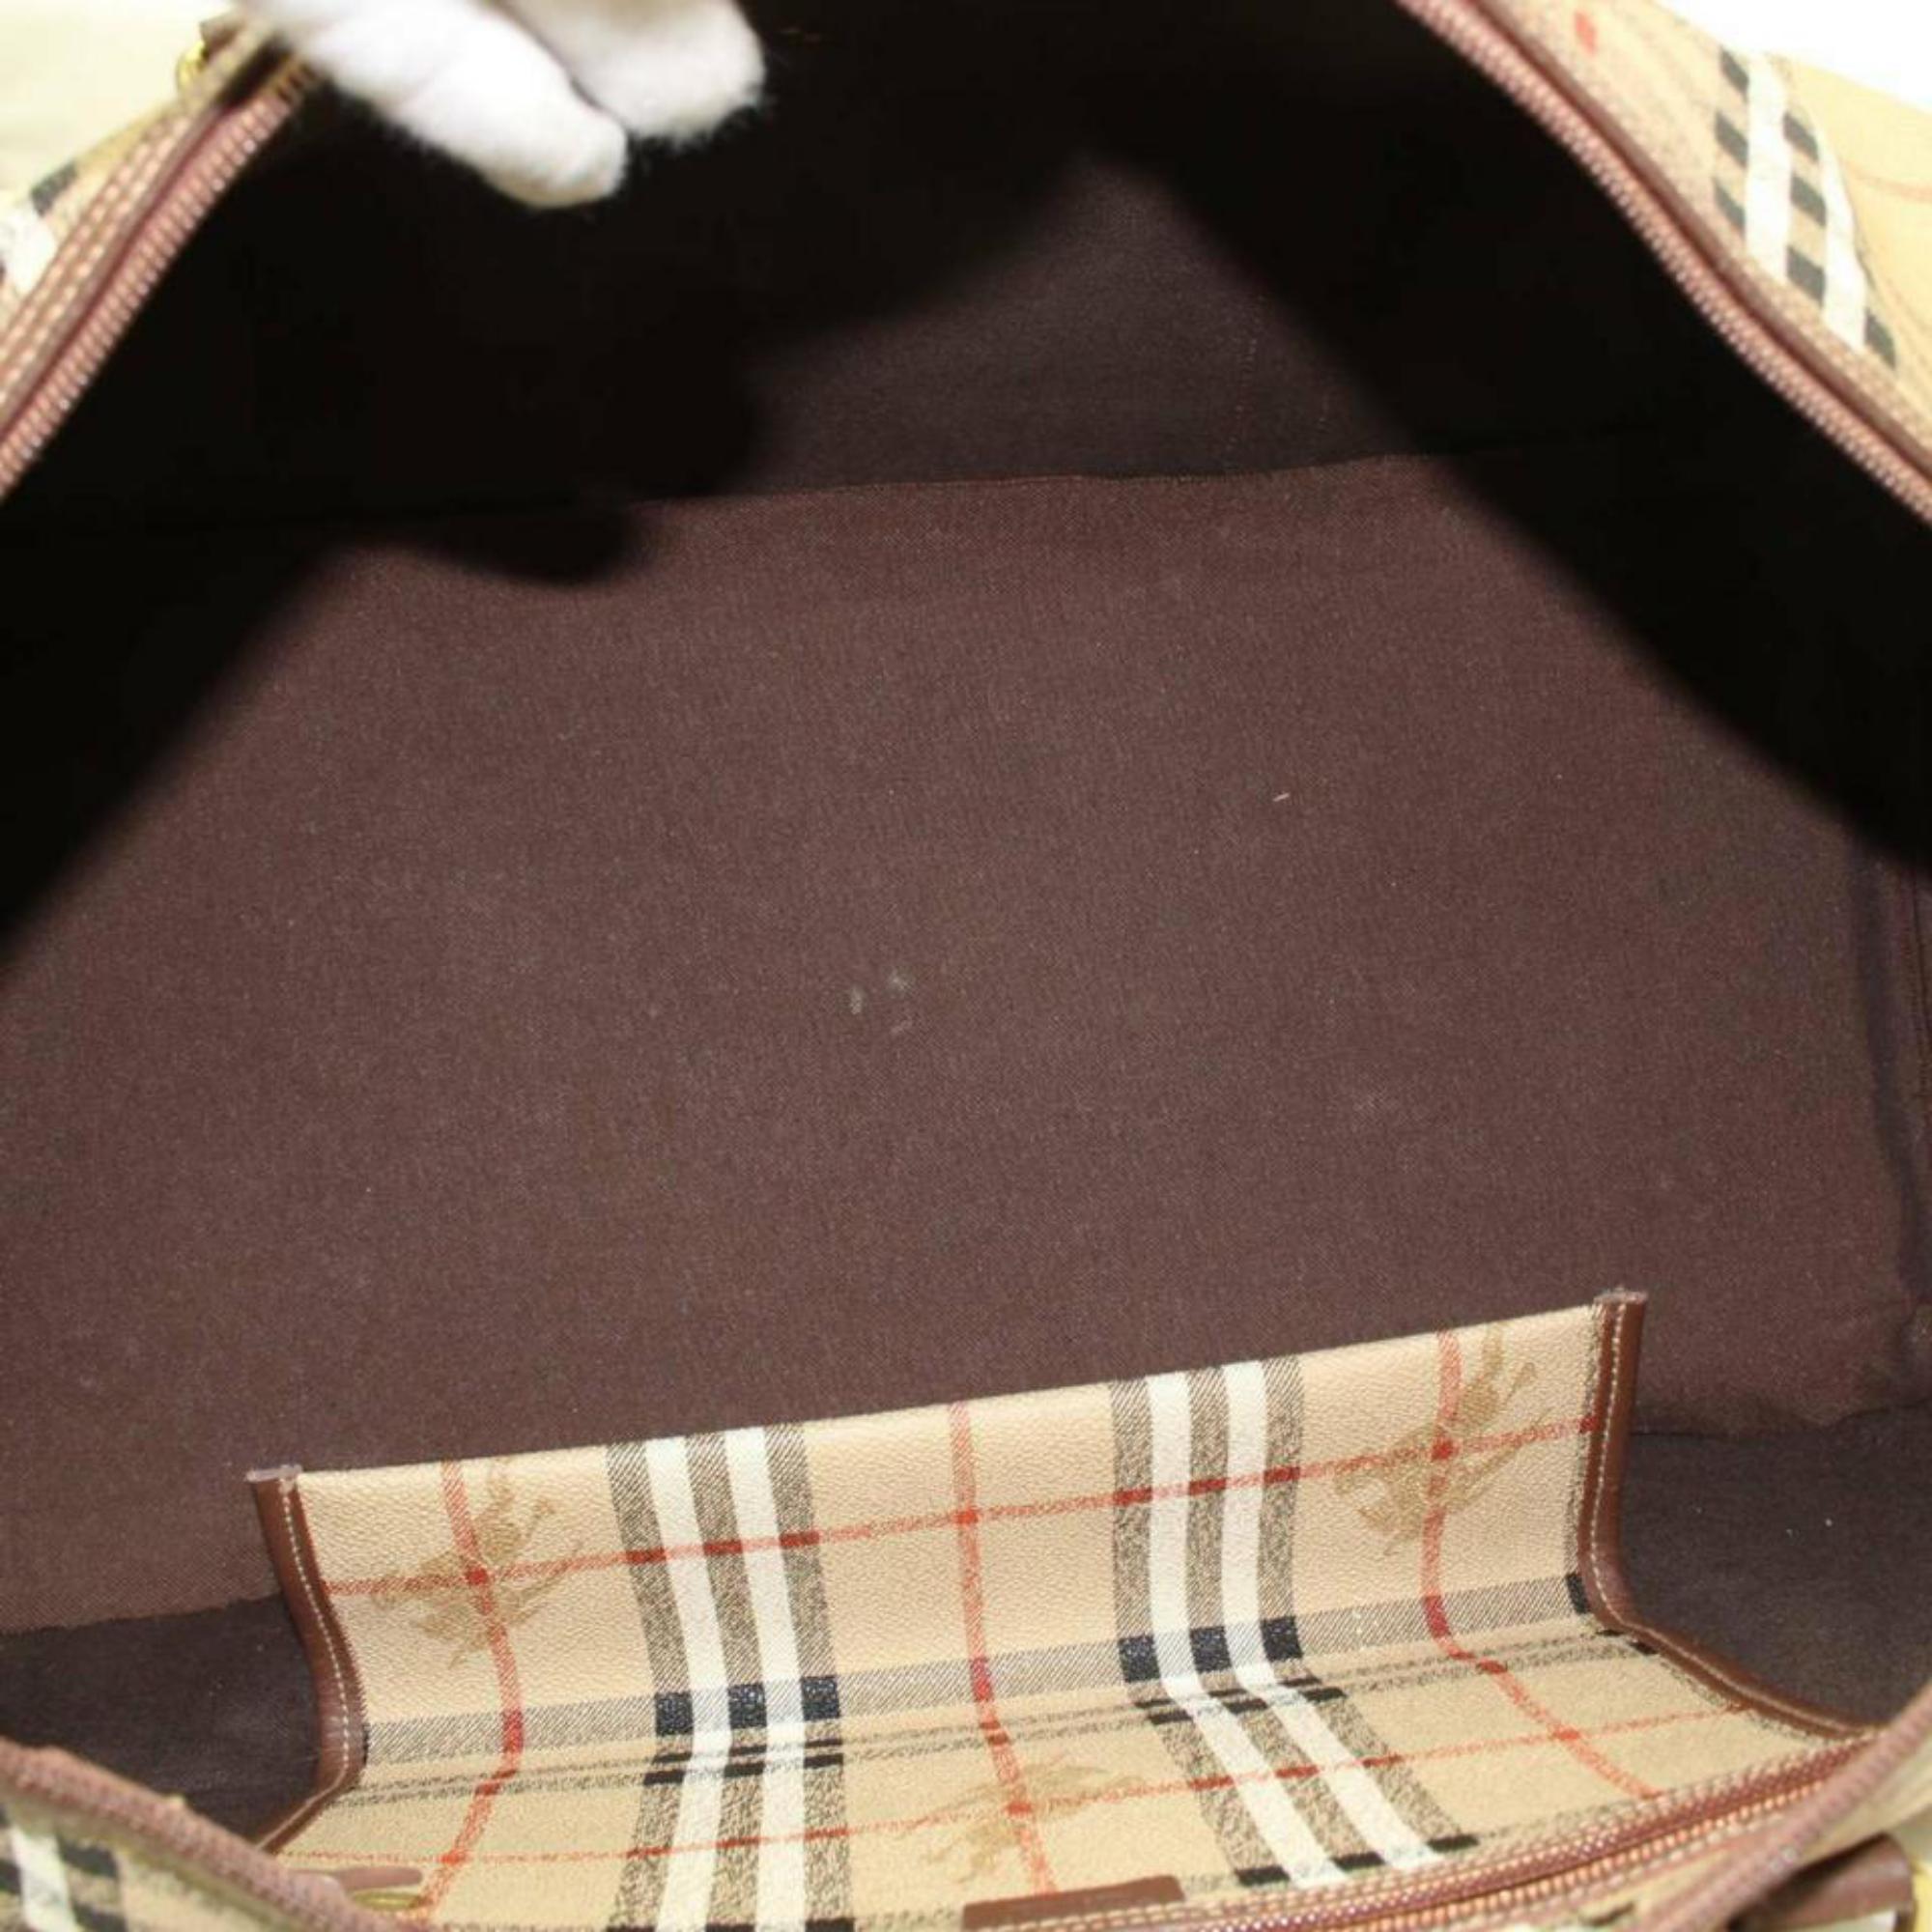 Burberry Nova Check Boston Duffle 870058 Beige Canvas Weekend/Travel Bag In Good Condition For Sale In Forest Hills, NY